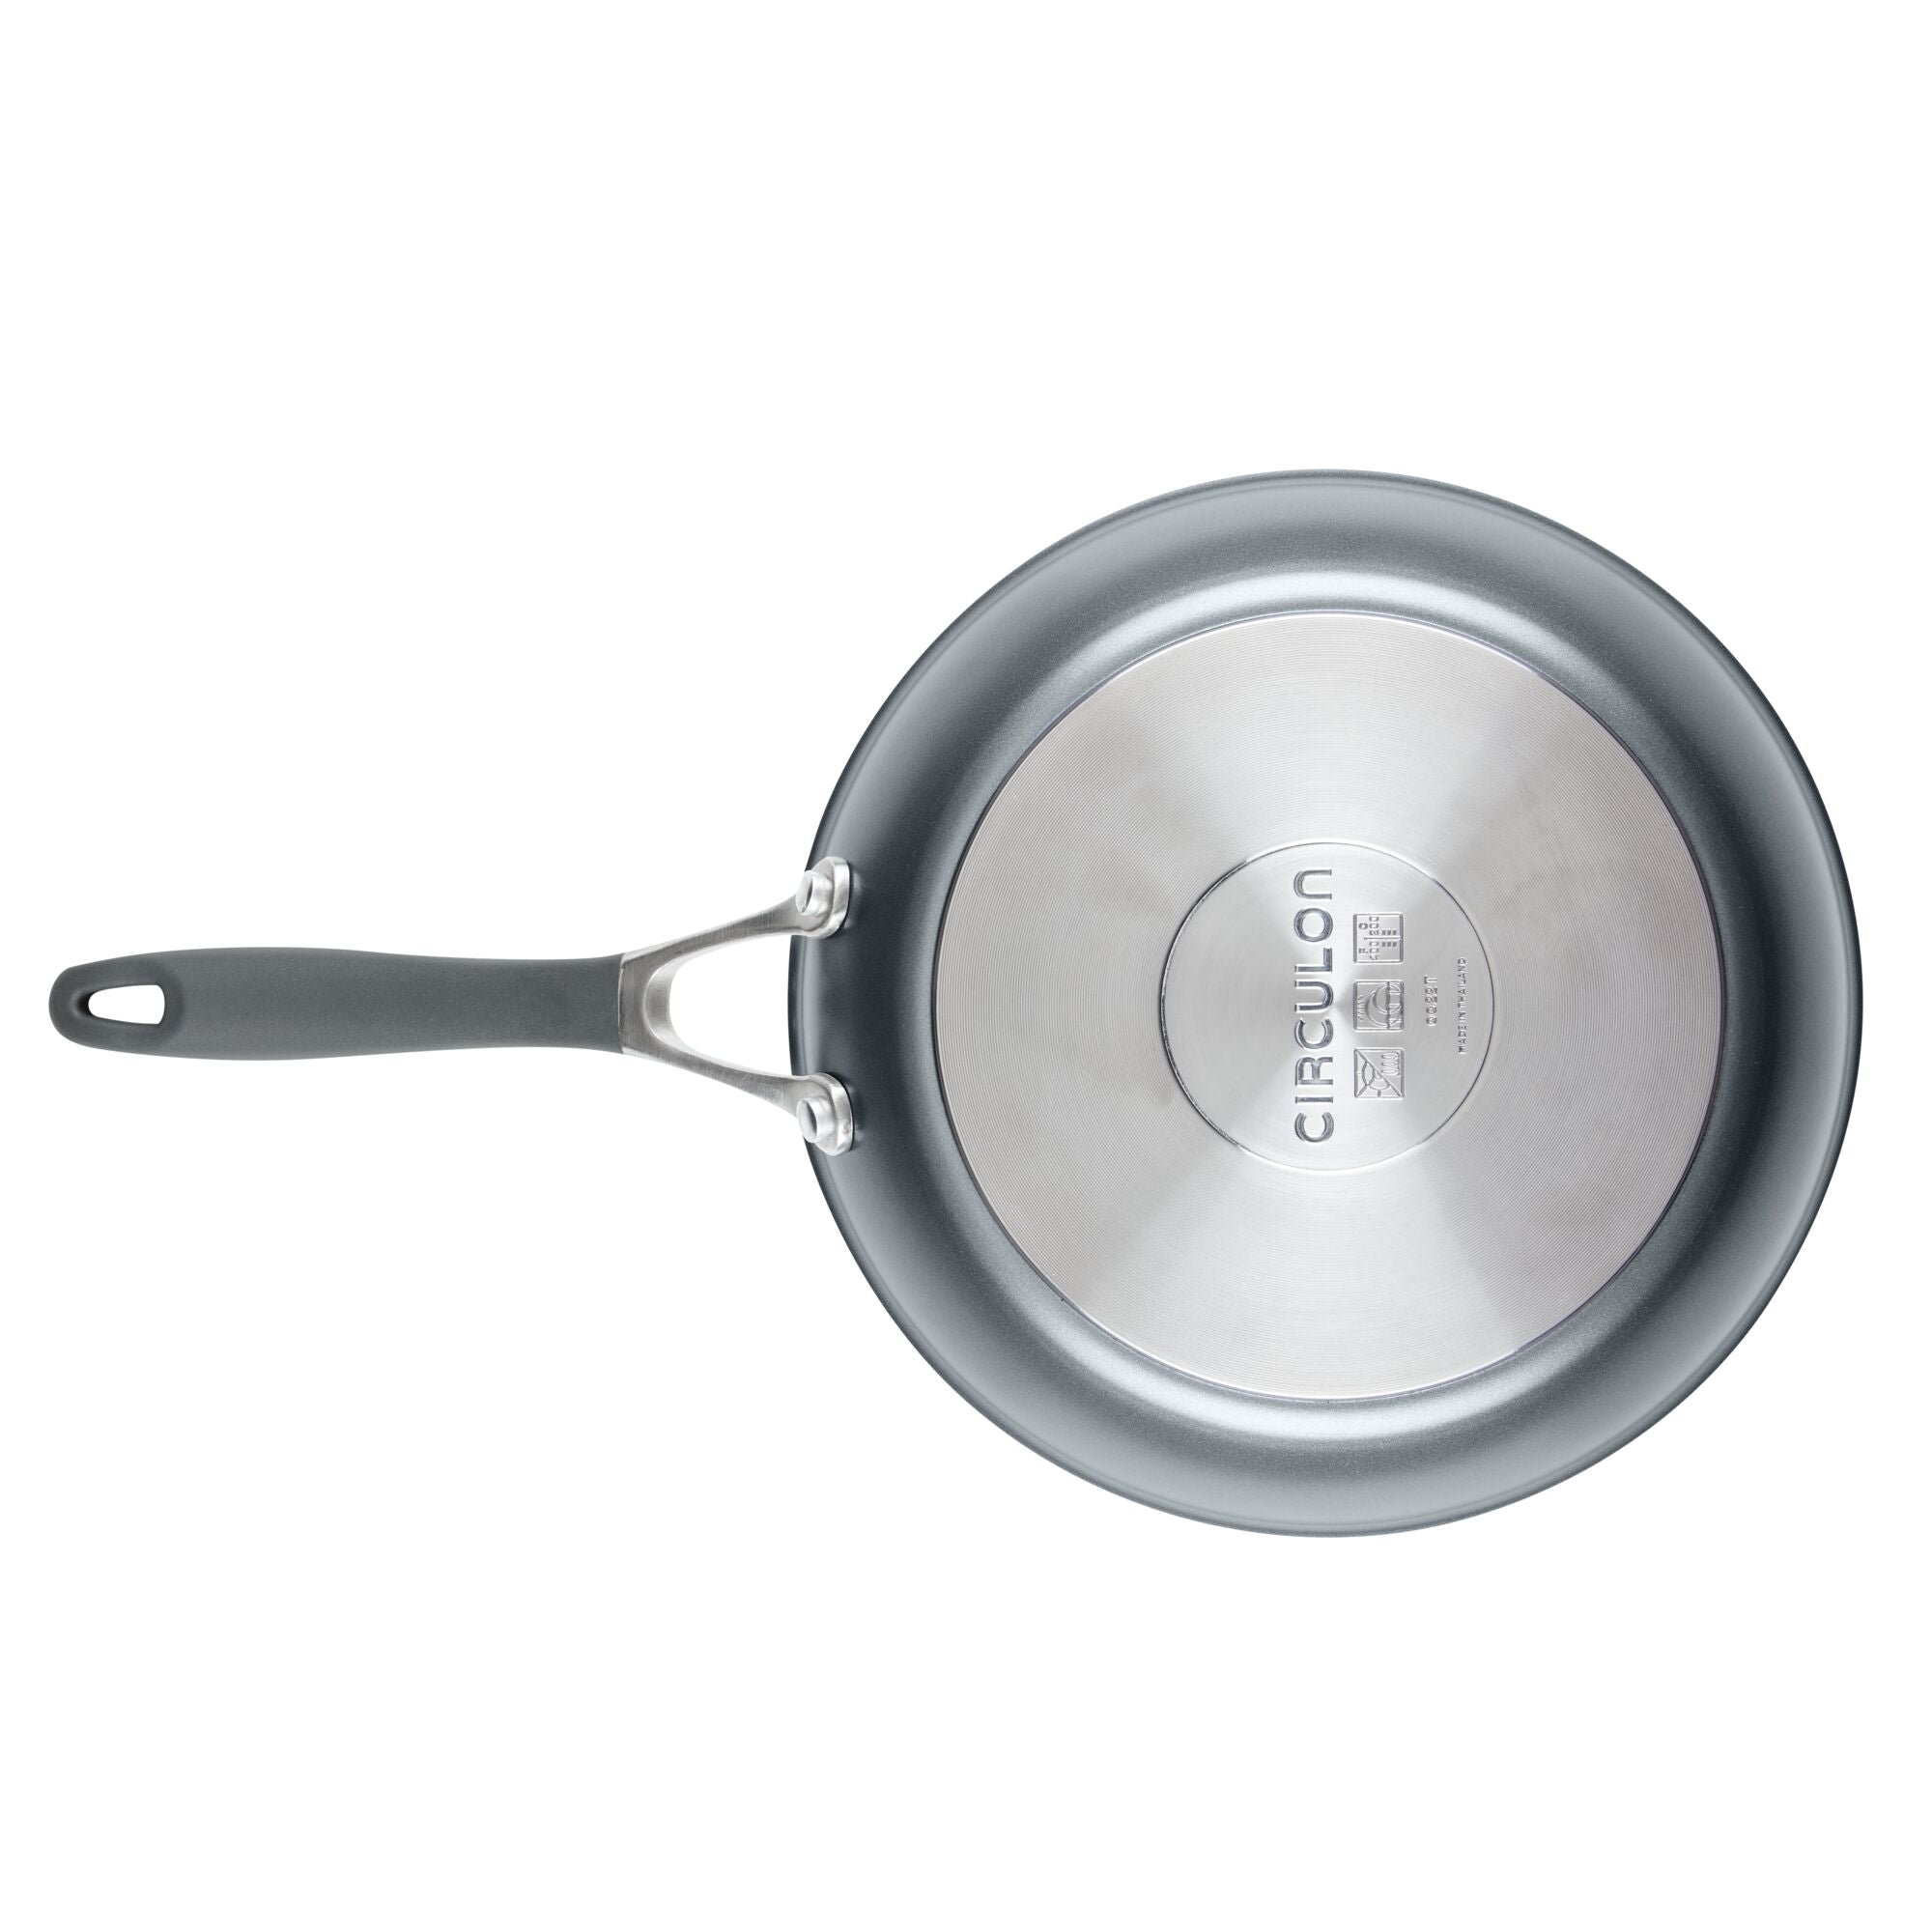 Circulon Cookware 8.5 and 10 Tri-Ply Clad Nonstick Frying Pan Set in  Stainless Steel